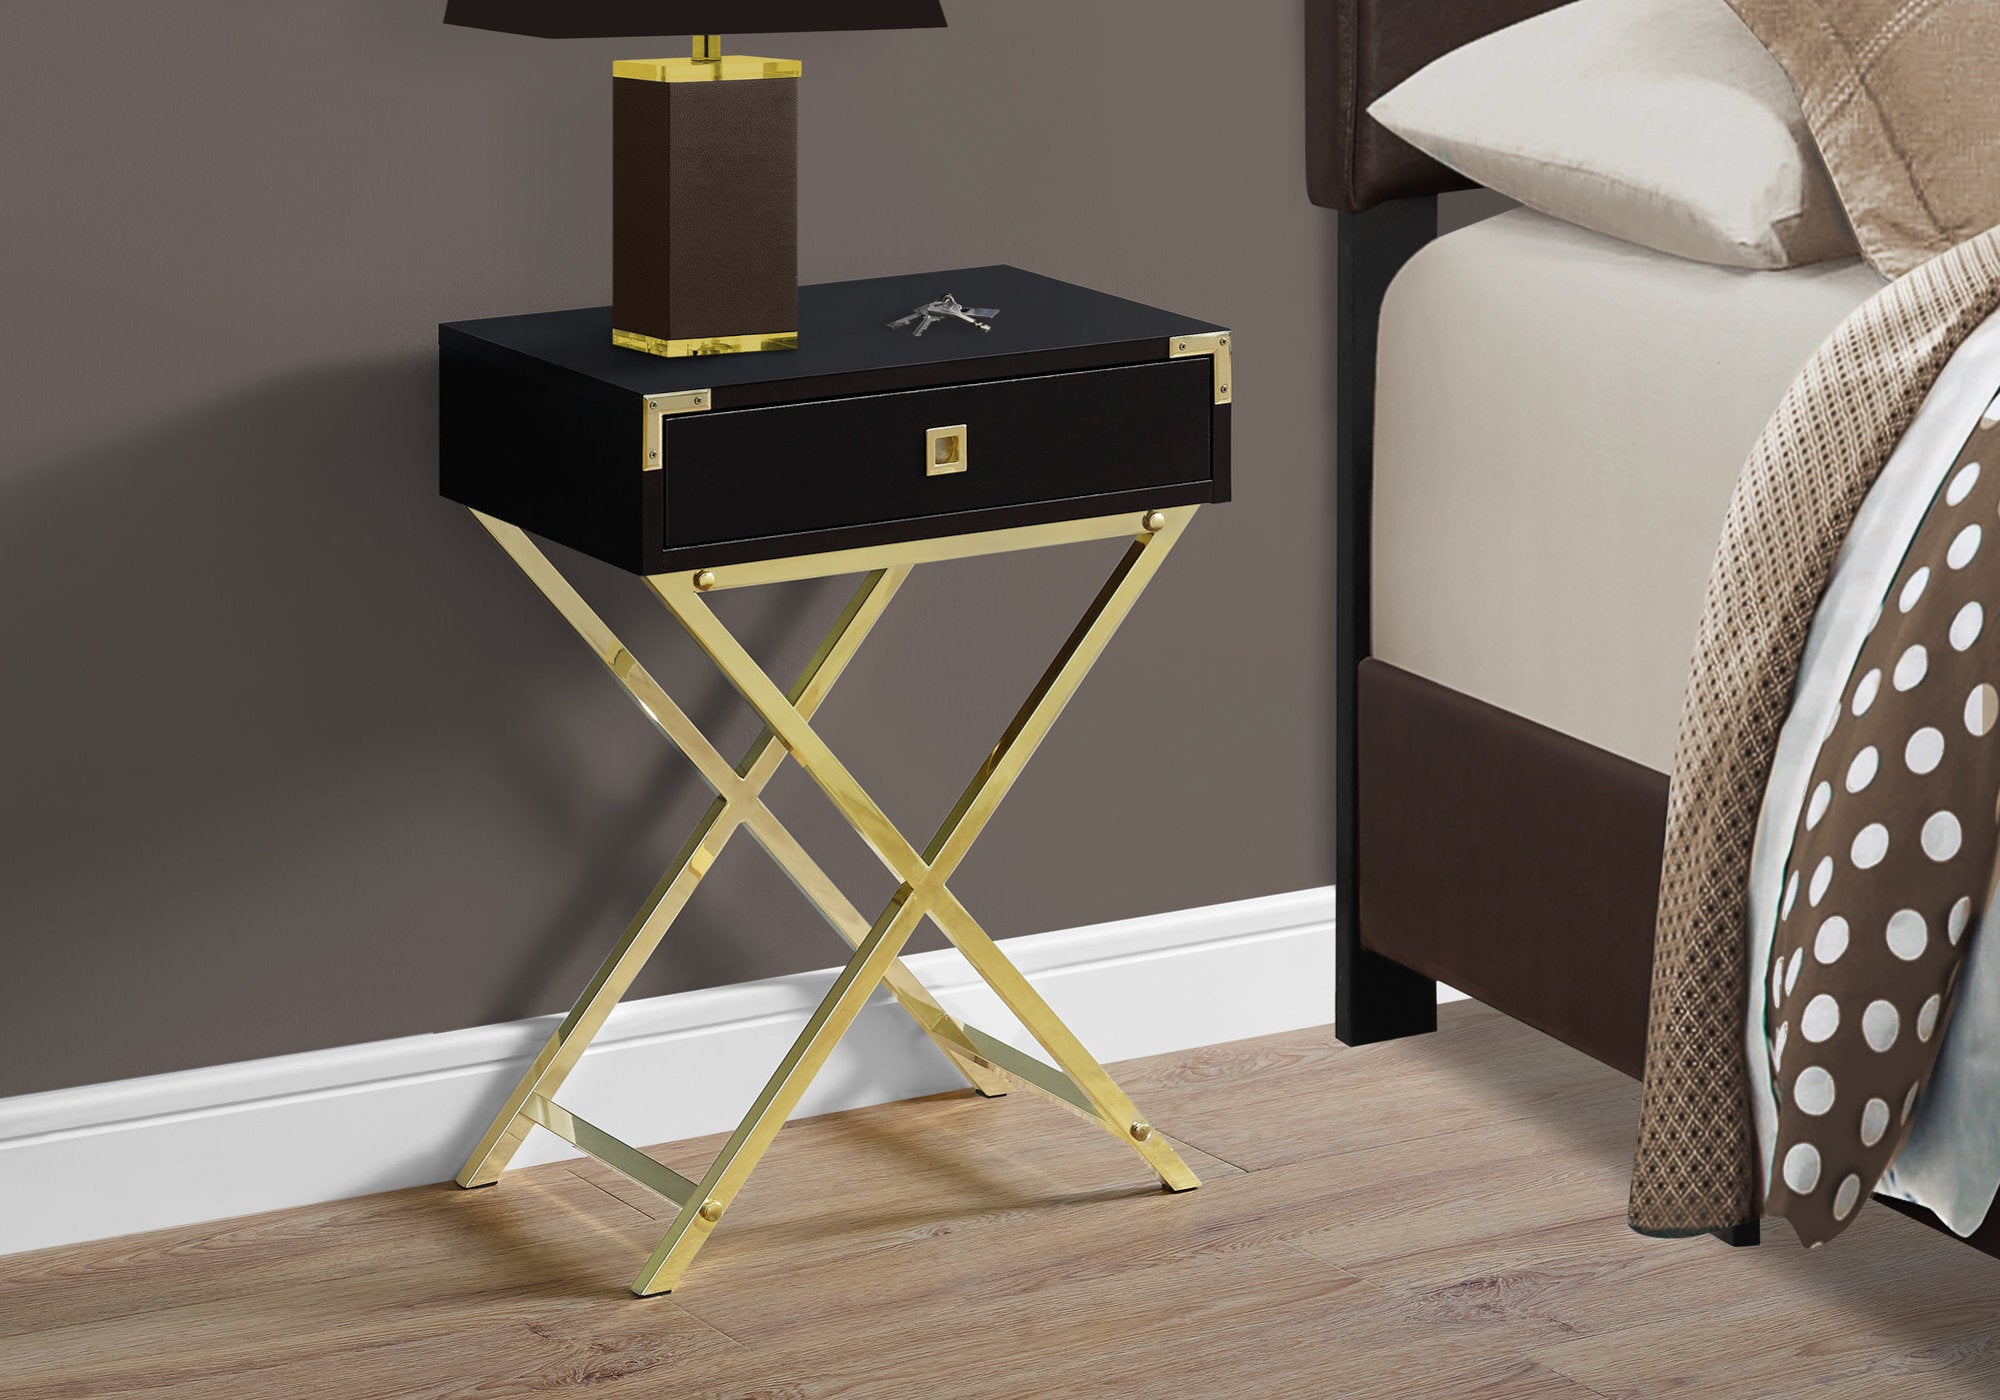 MN-323556    Accent Table, Side, End, Nightstand, Lamp, Living Room, Bedroom, Metal Legs, Laminate, Dark Brown, Gold, Contemporary, Modern